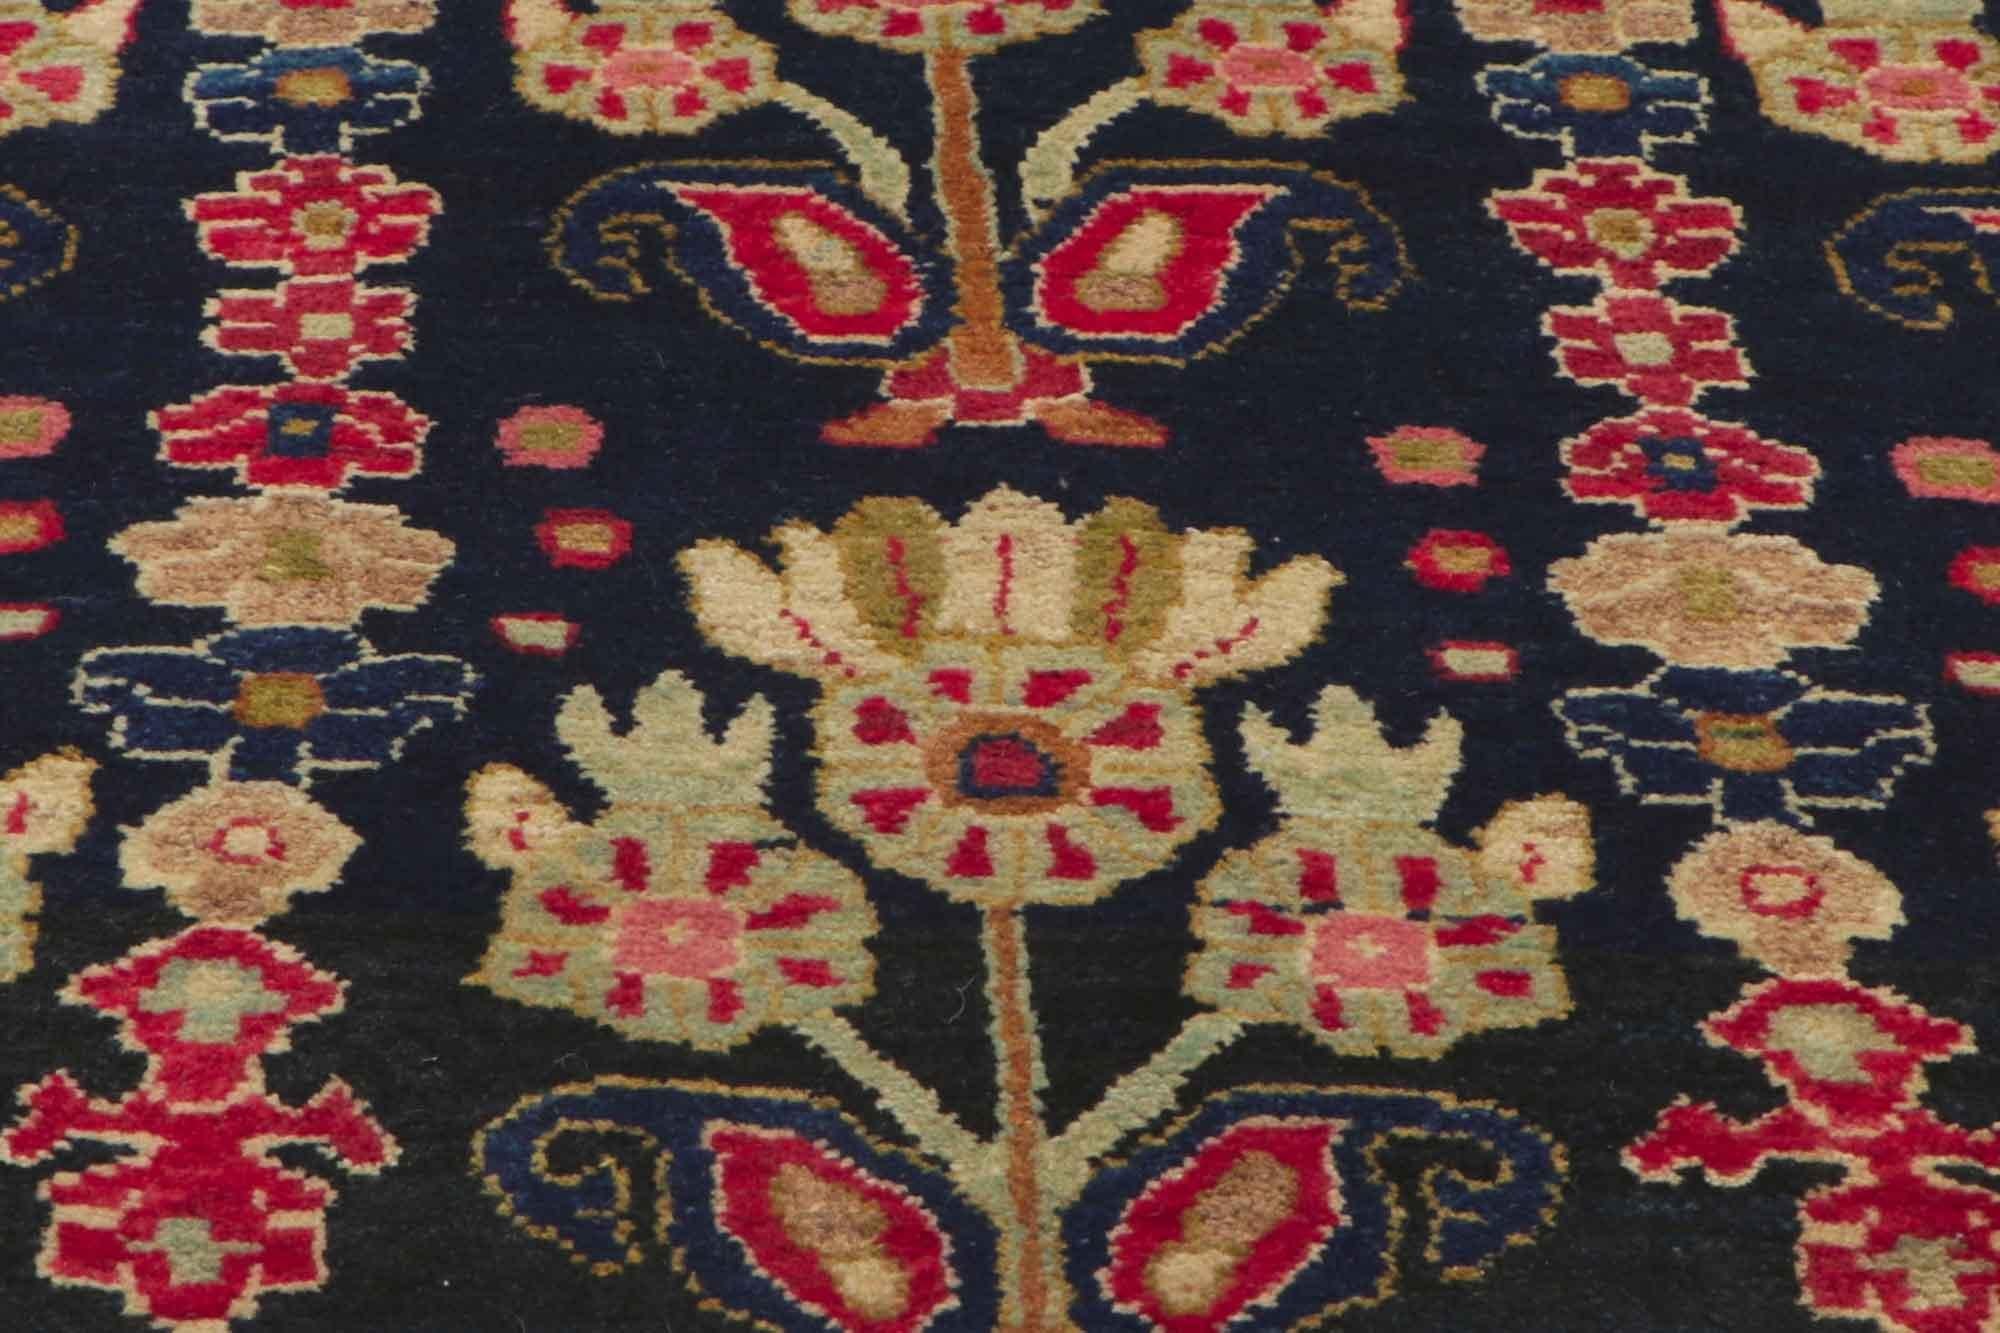 Hand-Knotted Antique Persian Mahal Rug, Timeless Elegance Meets Cultivated Beauty